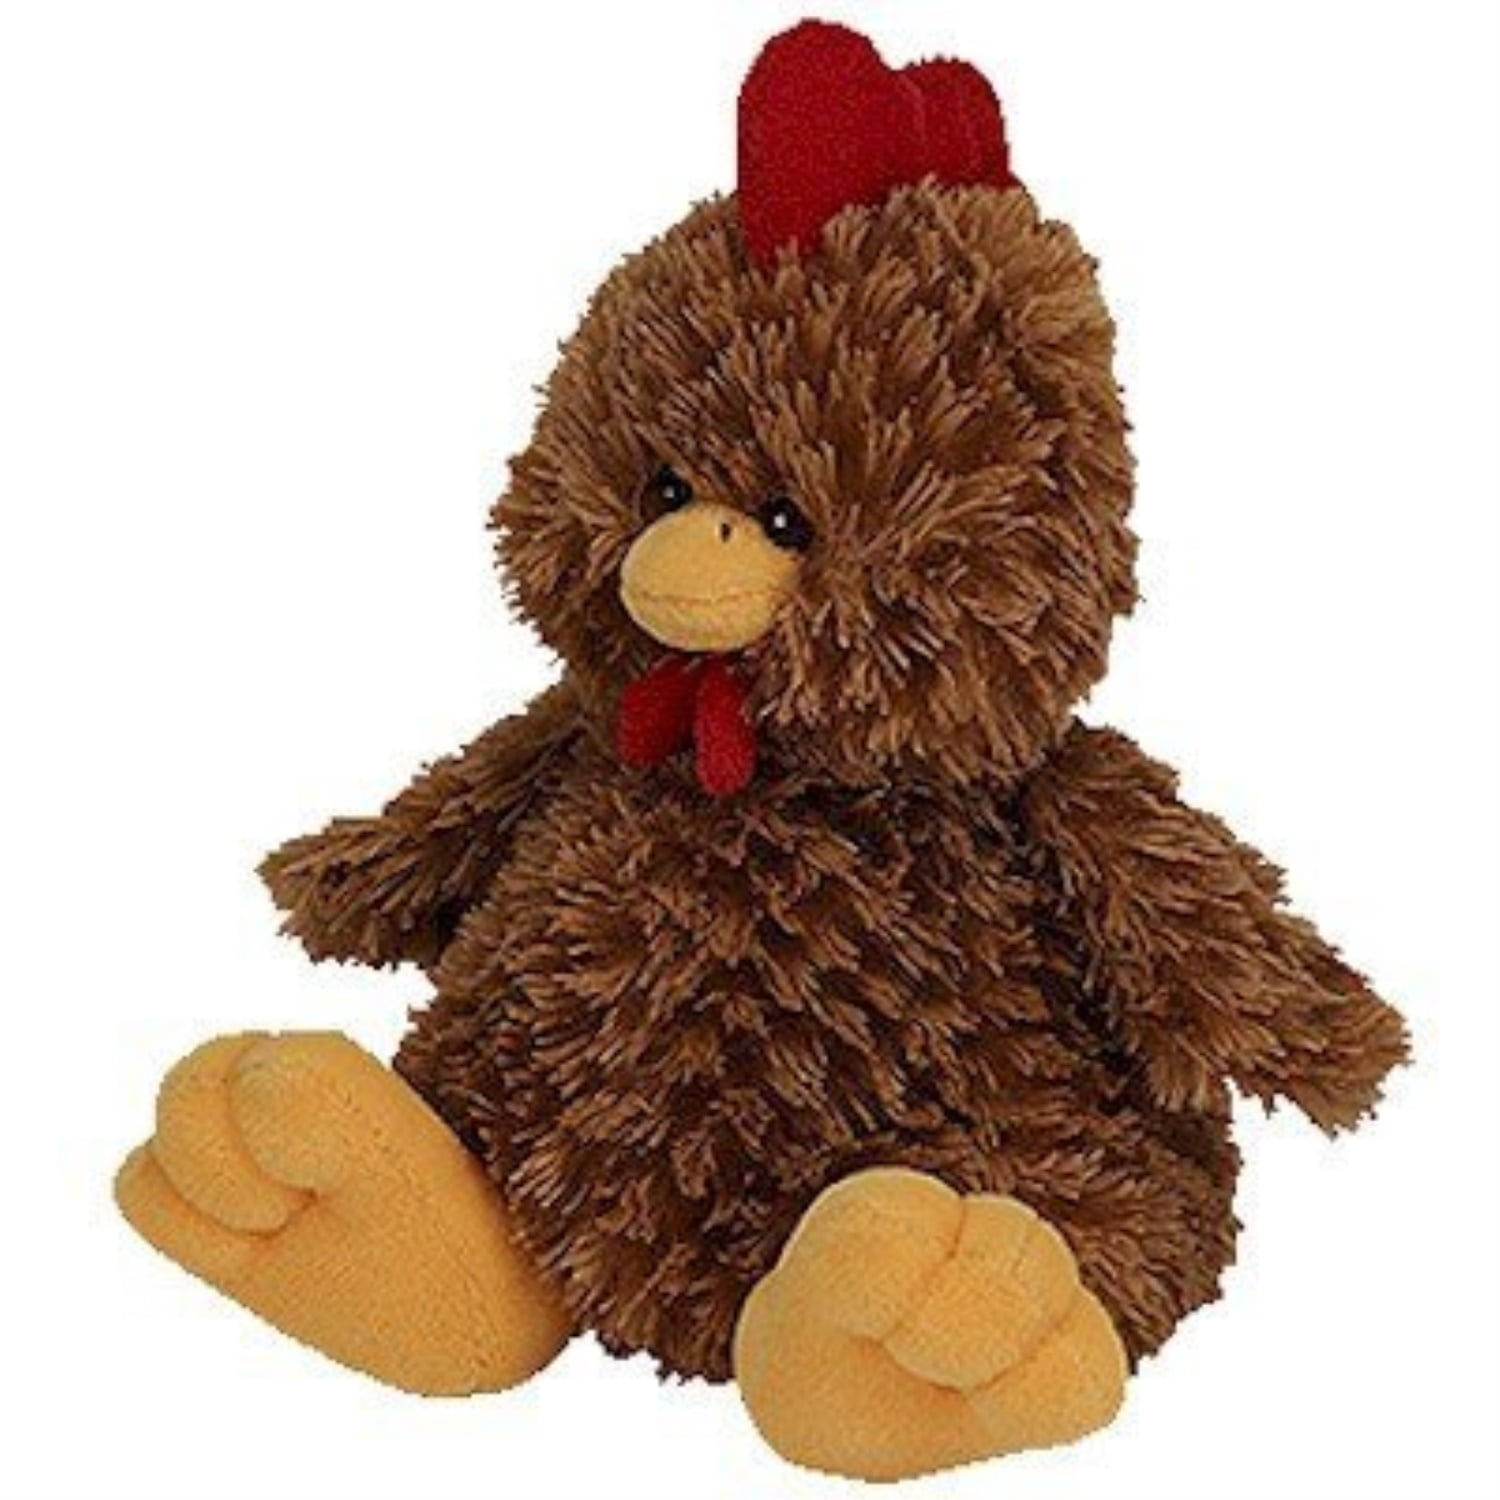 TY BEANIE BABY CLUCKY BBOTM AUGUST 2006 CHICKEN RETIRED WITH TAGS MINT 